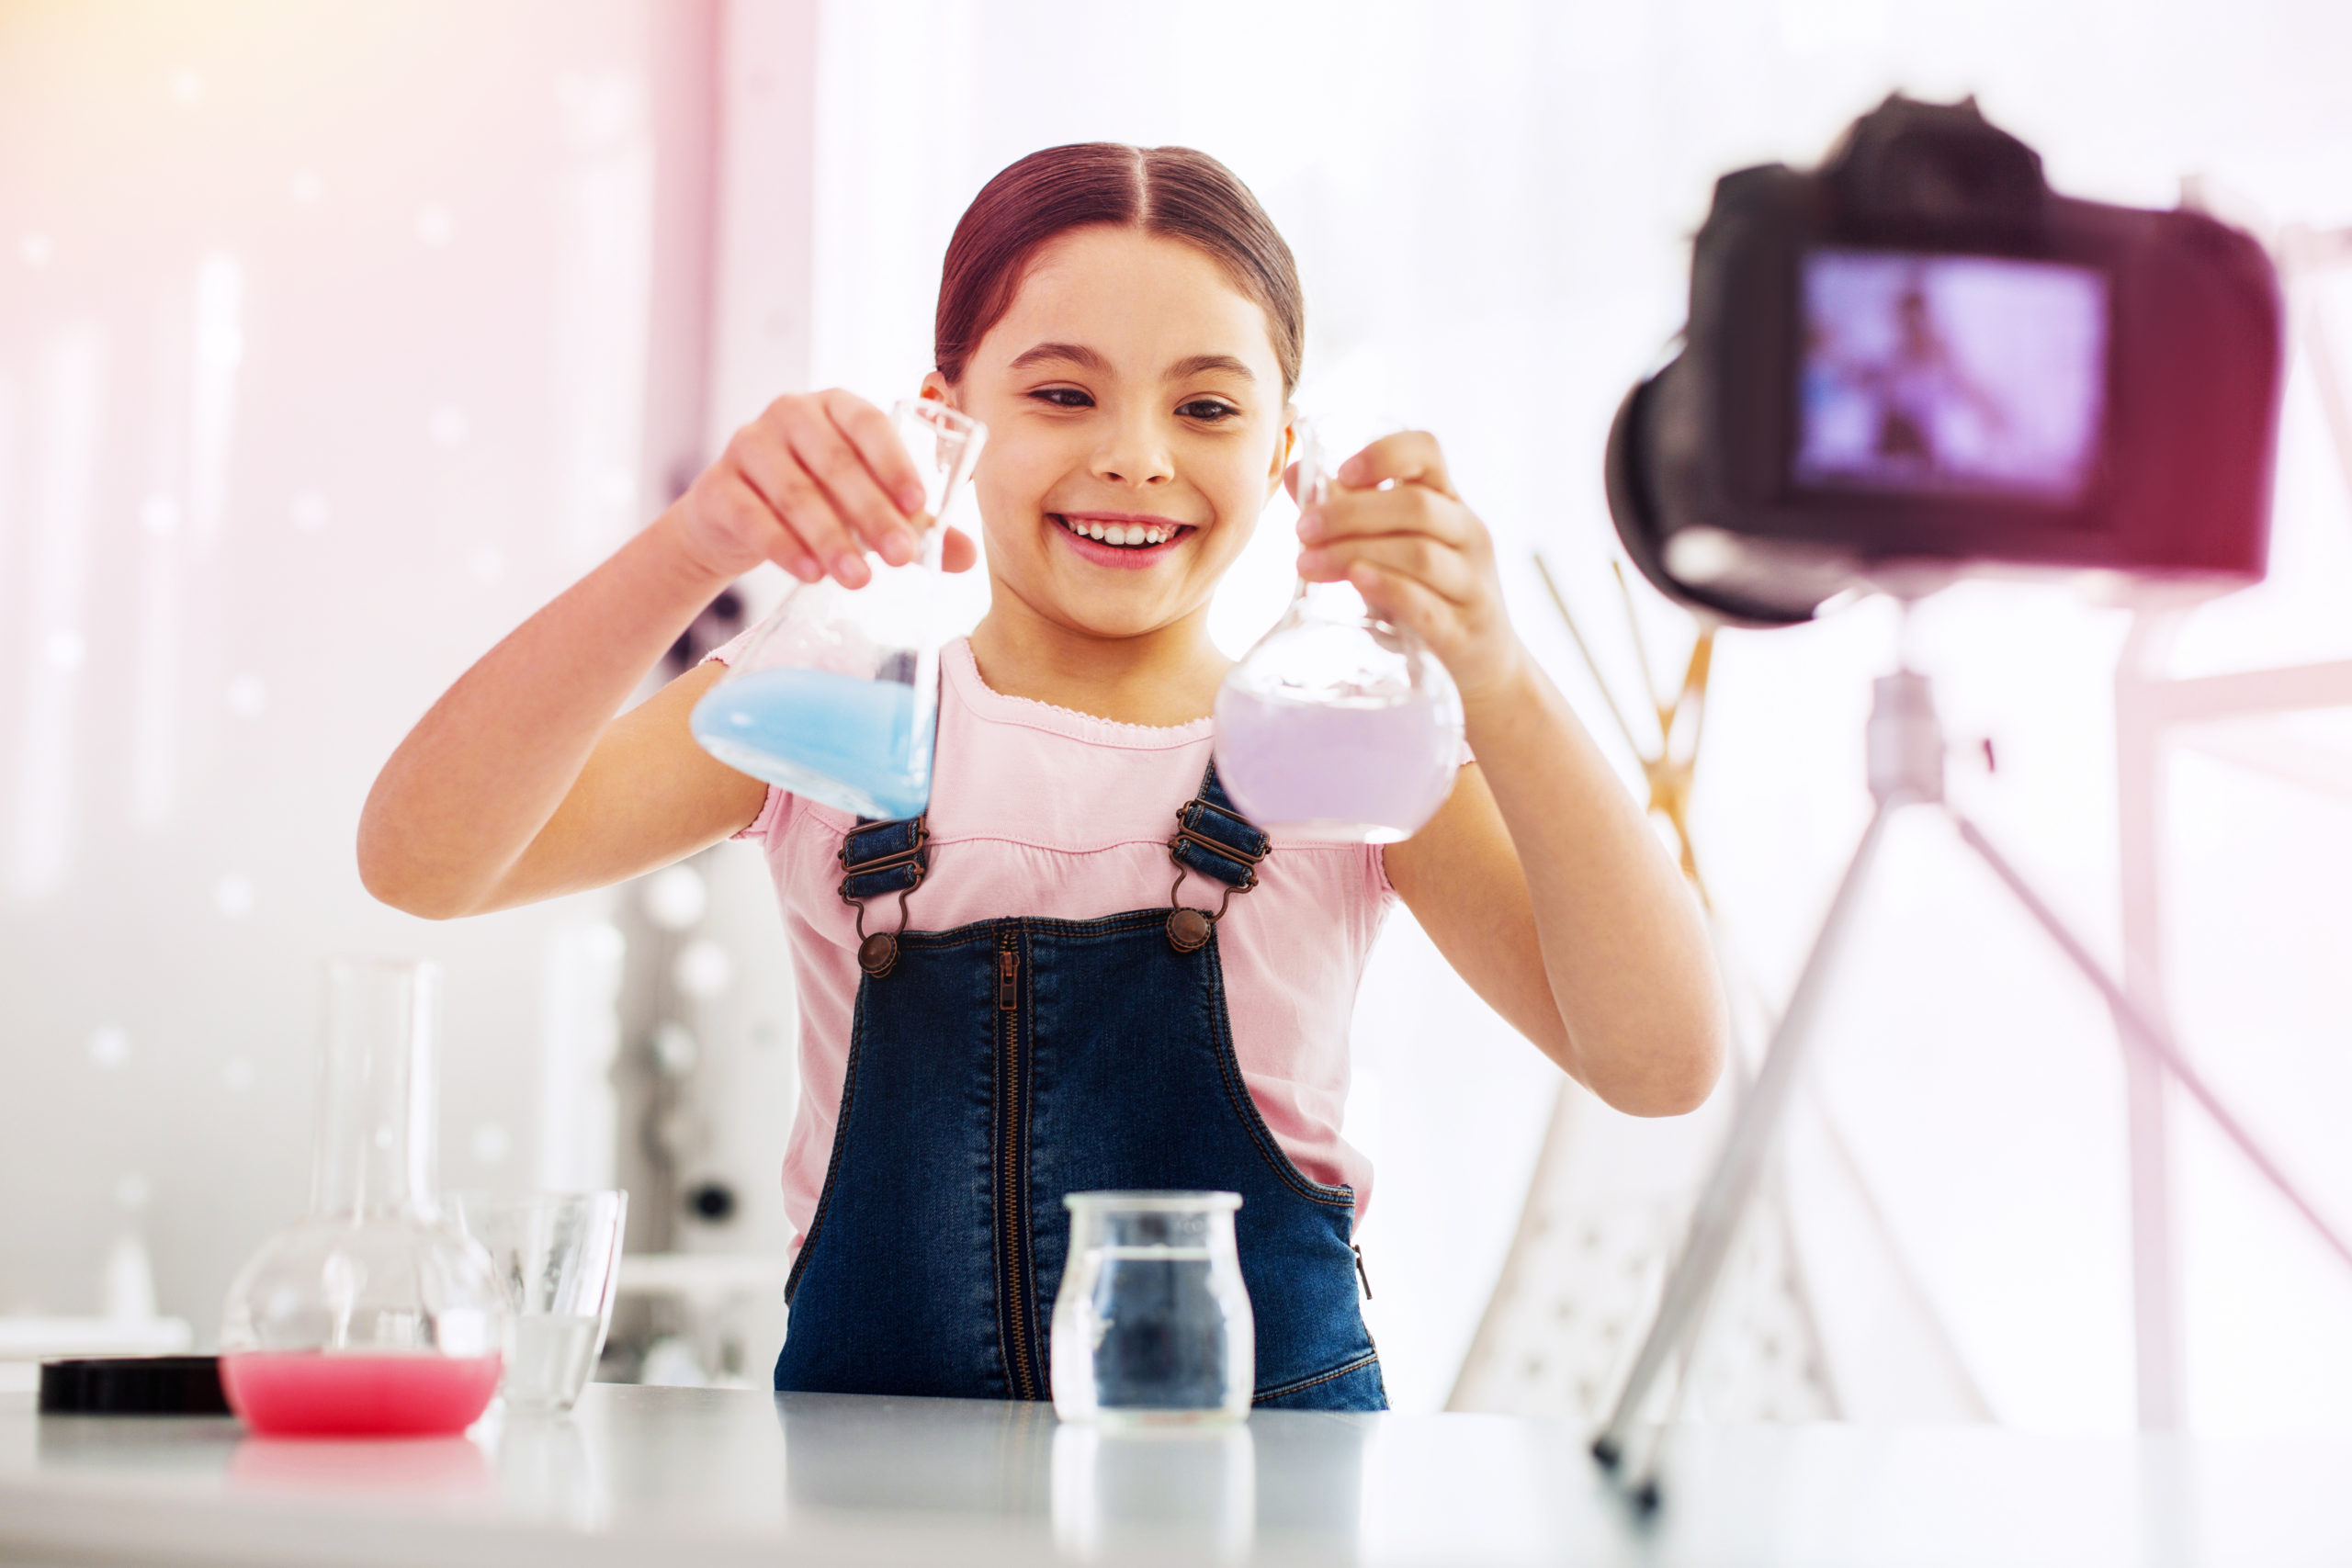 Funny girl fond of chemistry filming video while making experiment